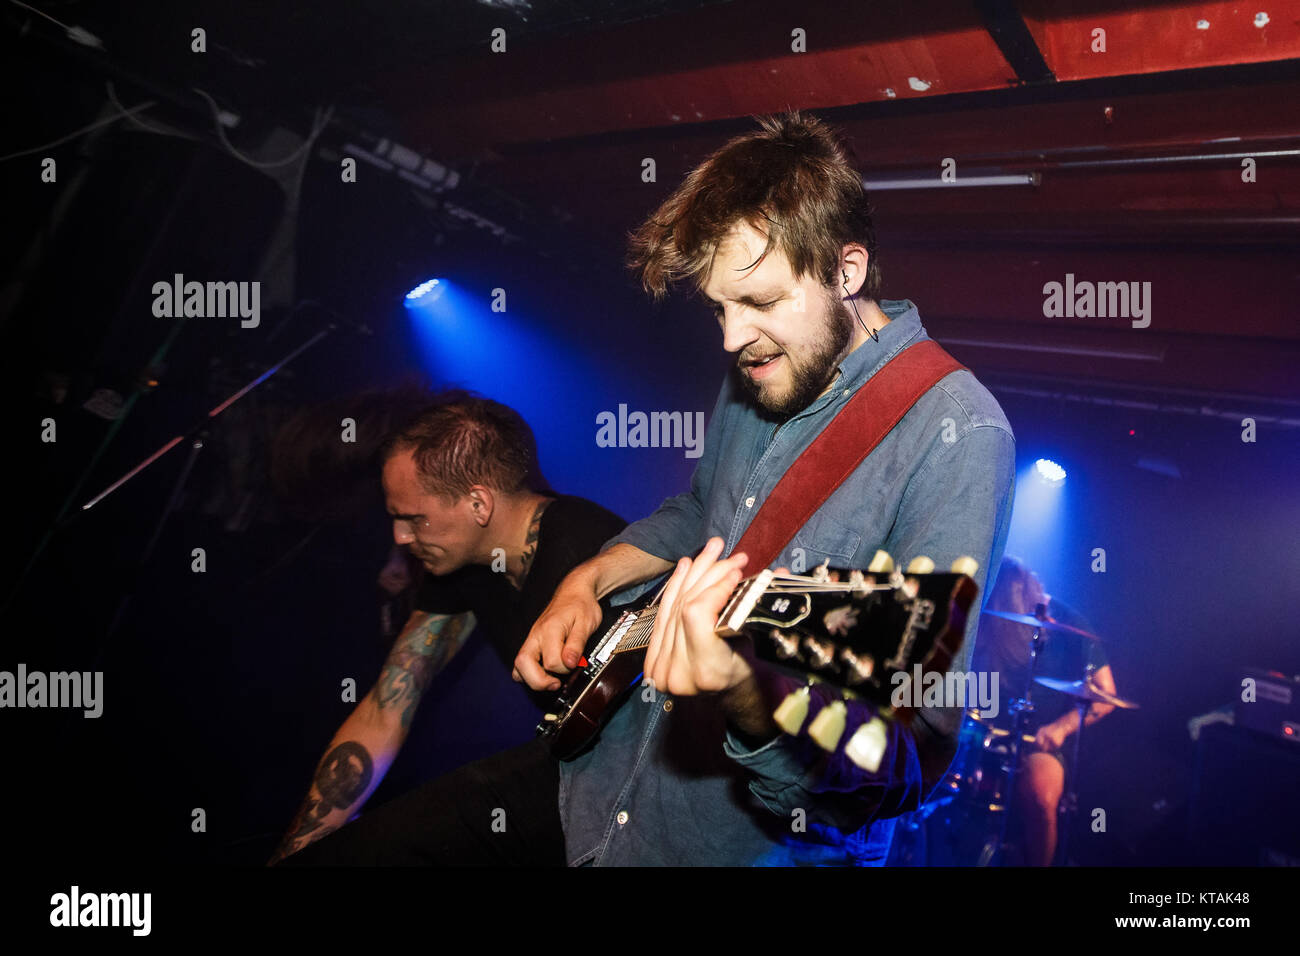 Sweden, Malmö – August 19, 2017. The Swedish death grindcore band God Mother performs a live concert at Underwerket in Malmö. Here guitarist Max Lindstrom is seen live on stage. Stock Photo